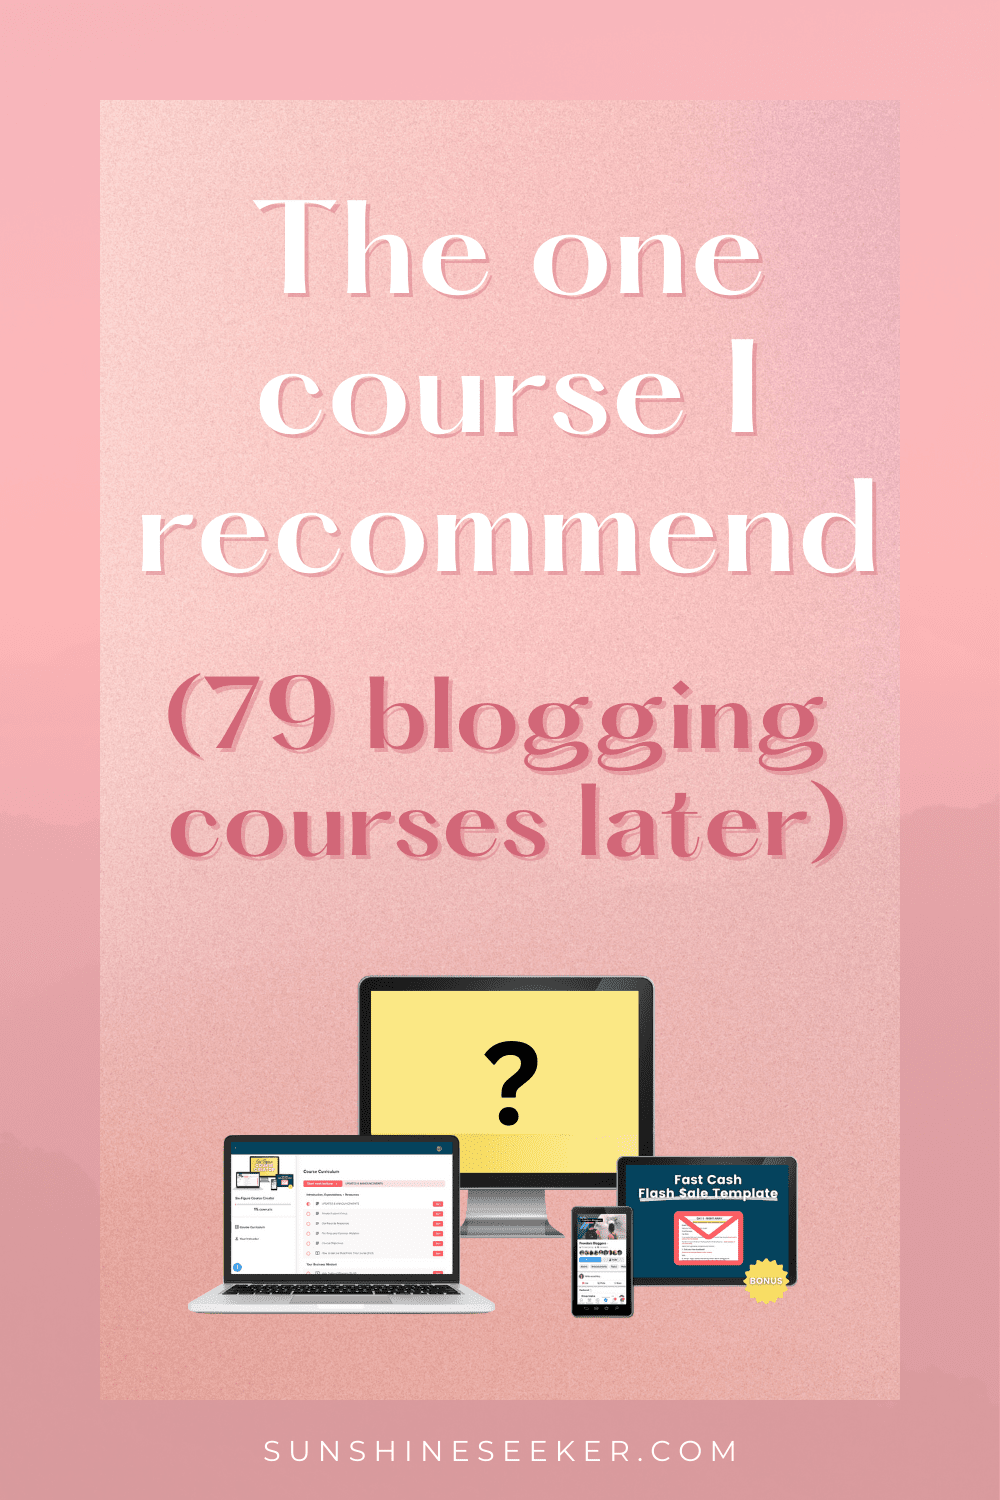 Six-Figure Course Creator - The only blogging course I recommend after completing 79 courses